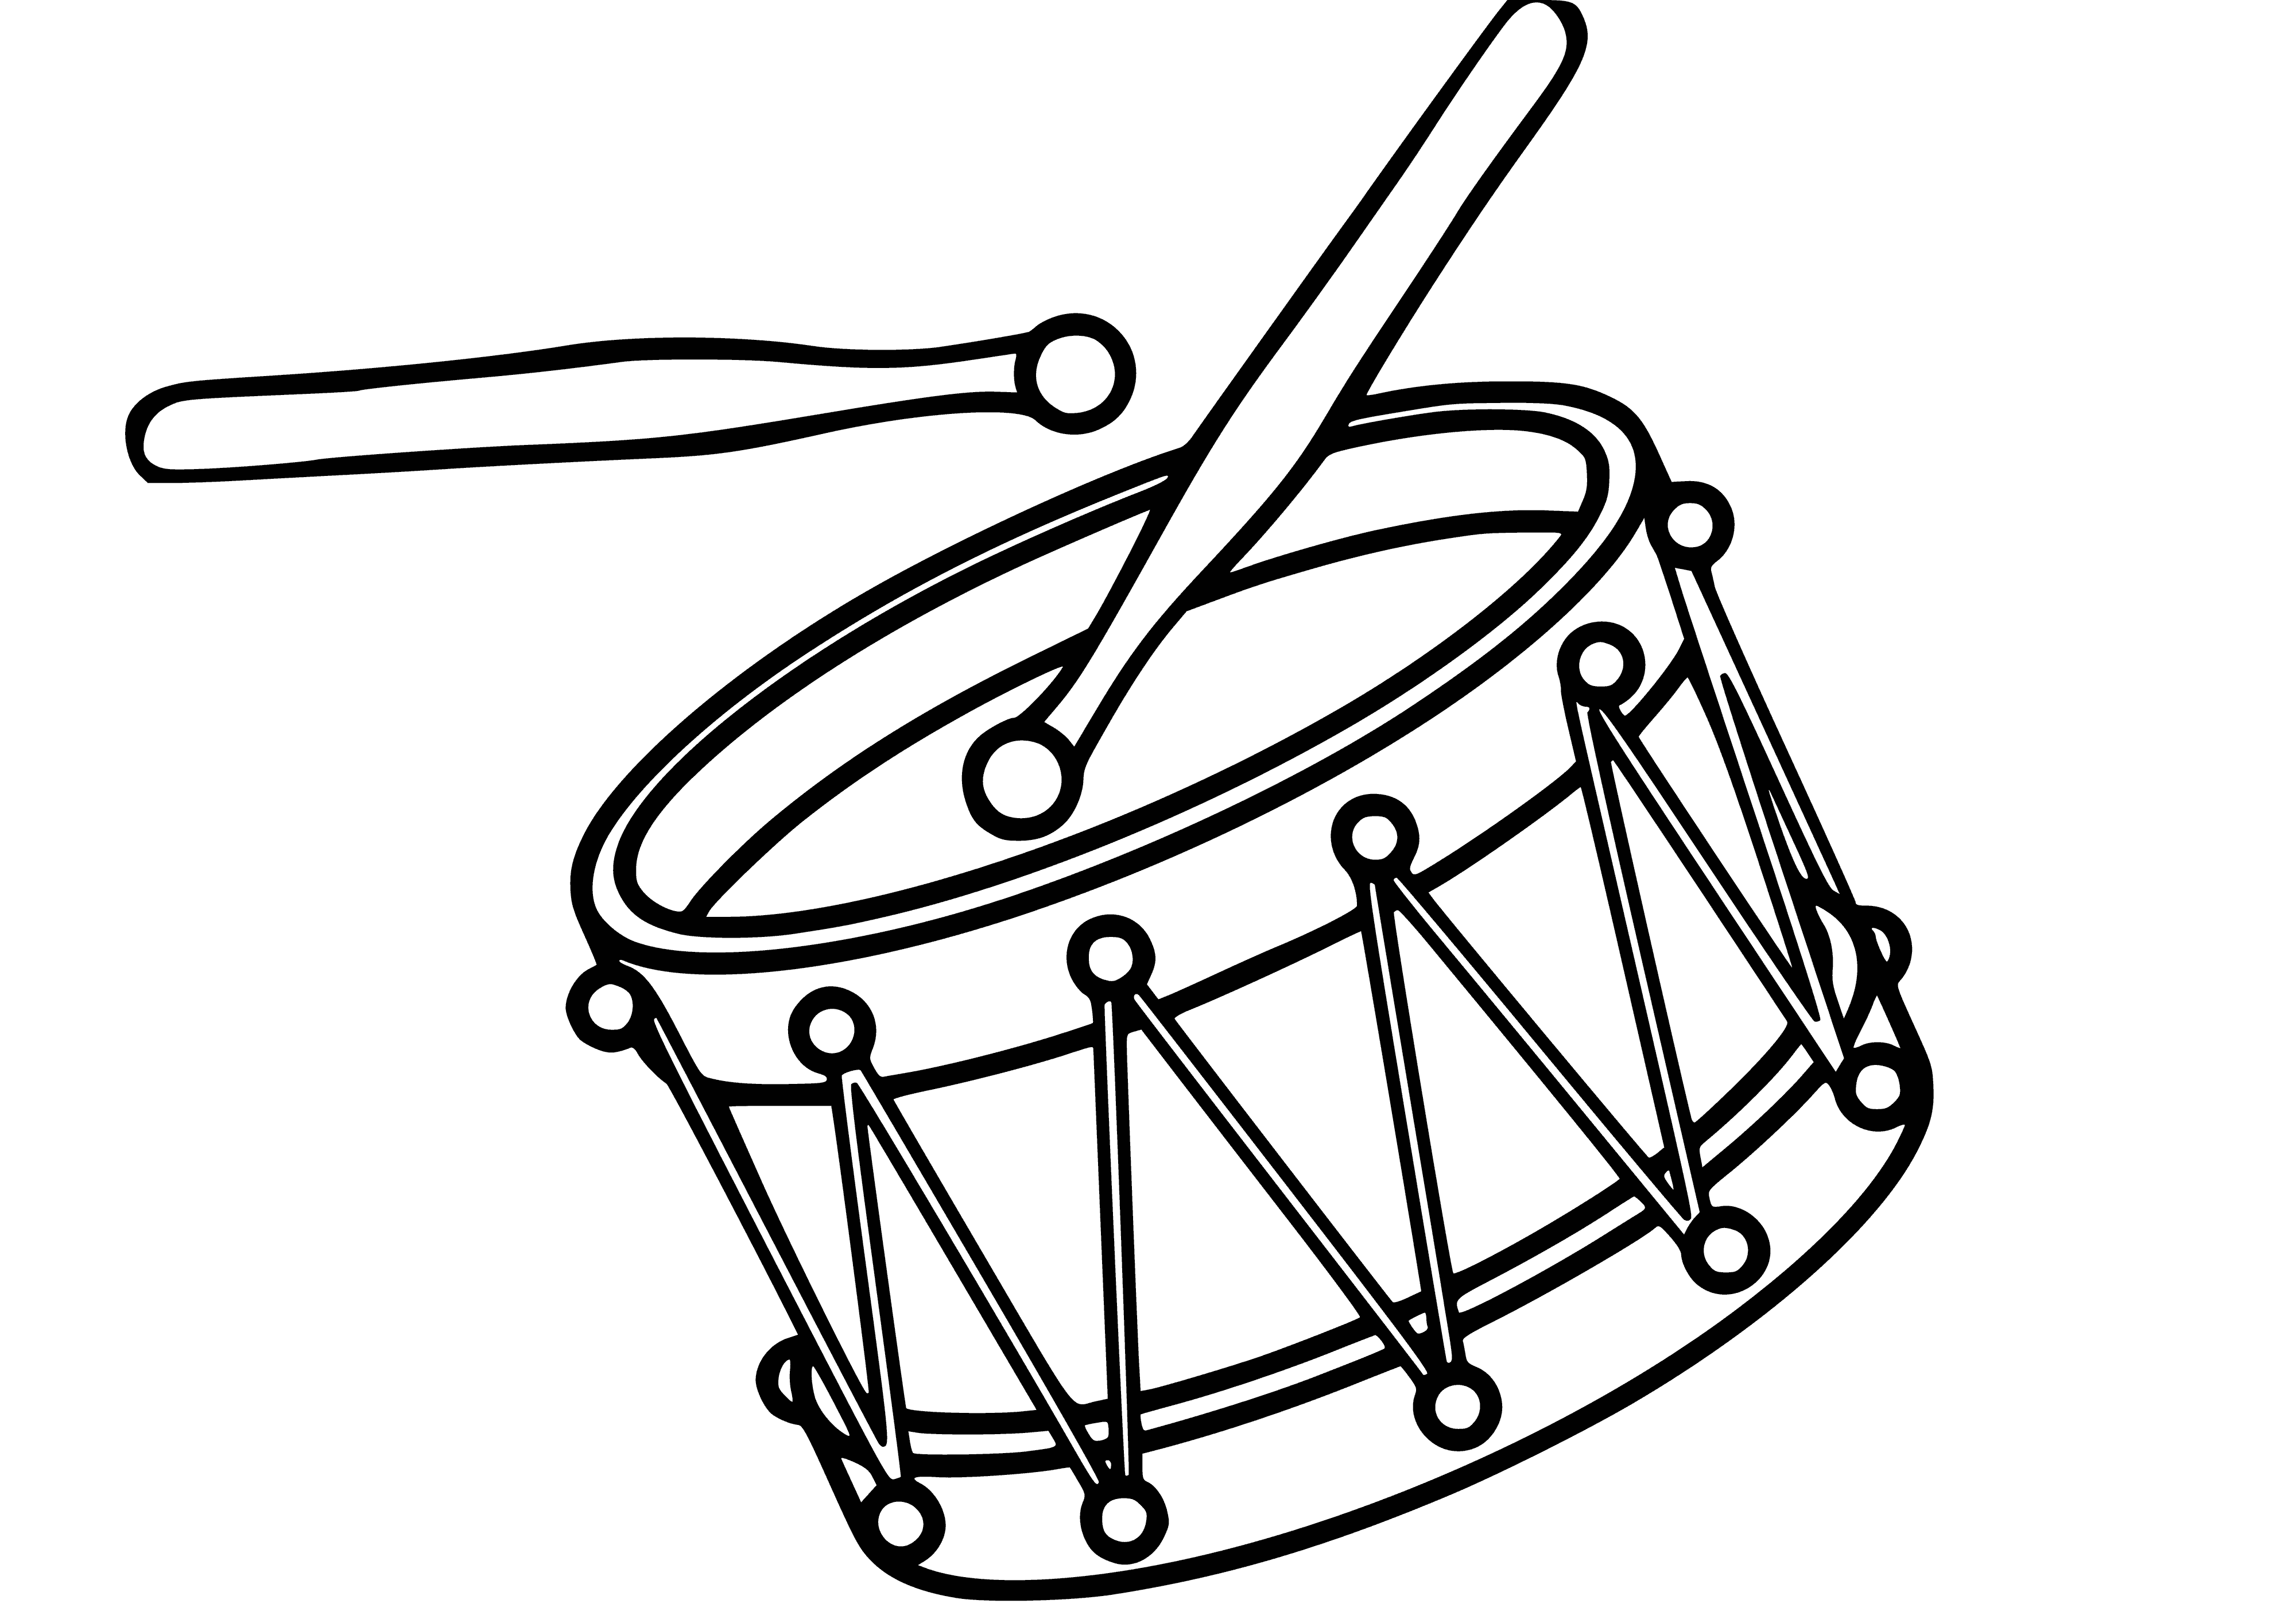 coloring page: A drum coloring page: black circular drum with white circle/square, 2 white lines, 4 black triangles, black line around outside. #coloring